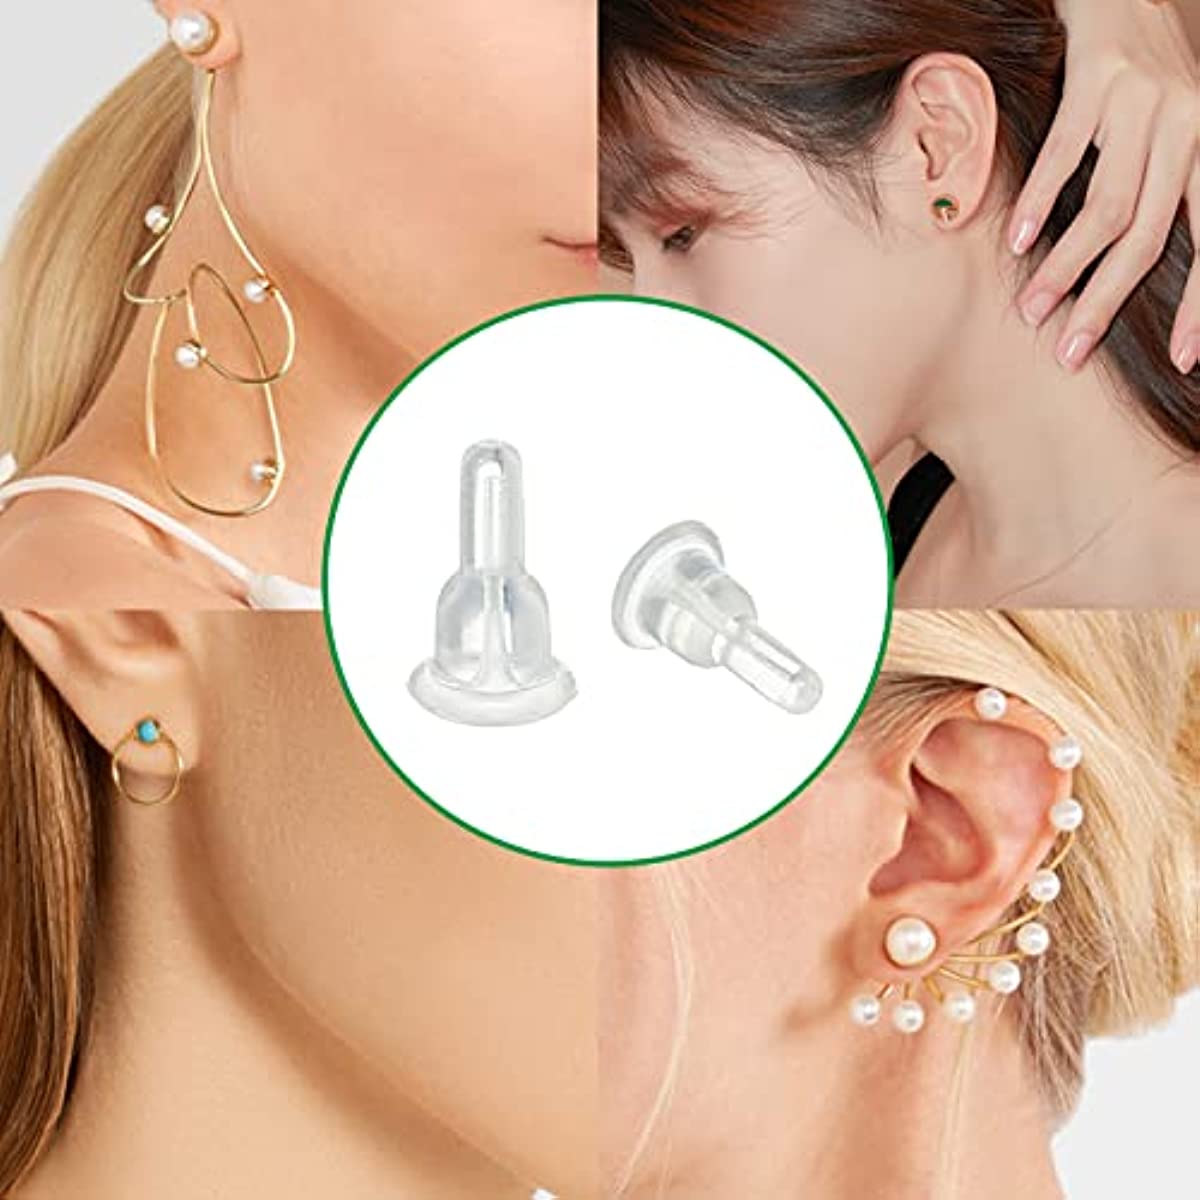  50Pcs Soft Clear Safety Back Pads Silicone Earring Stoppers  answering a Phone or Hugging and Sleep More Comfortable